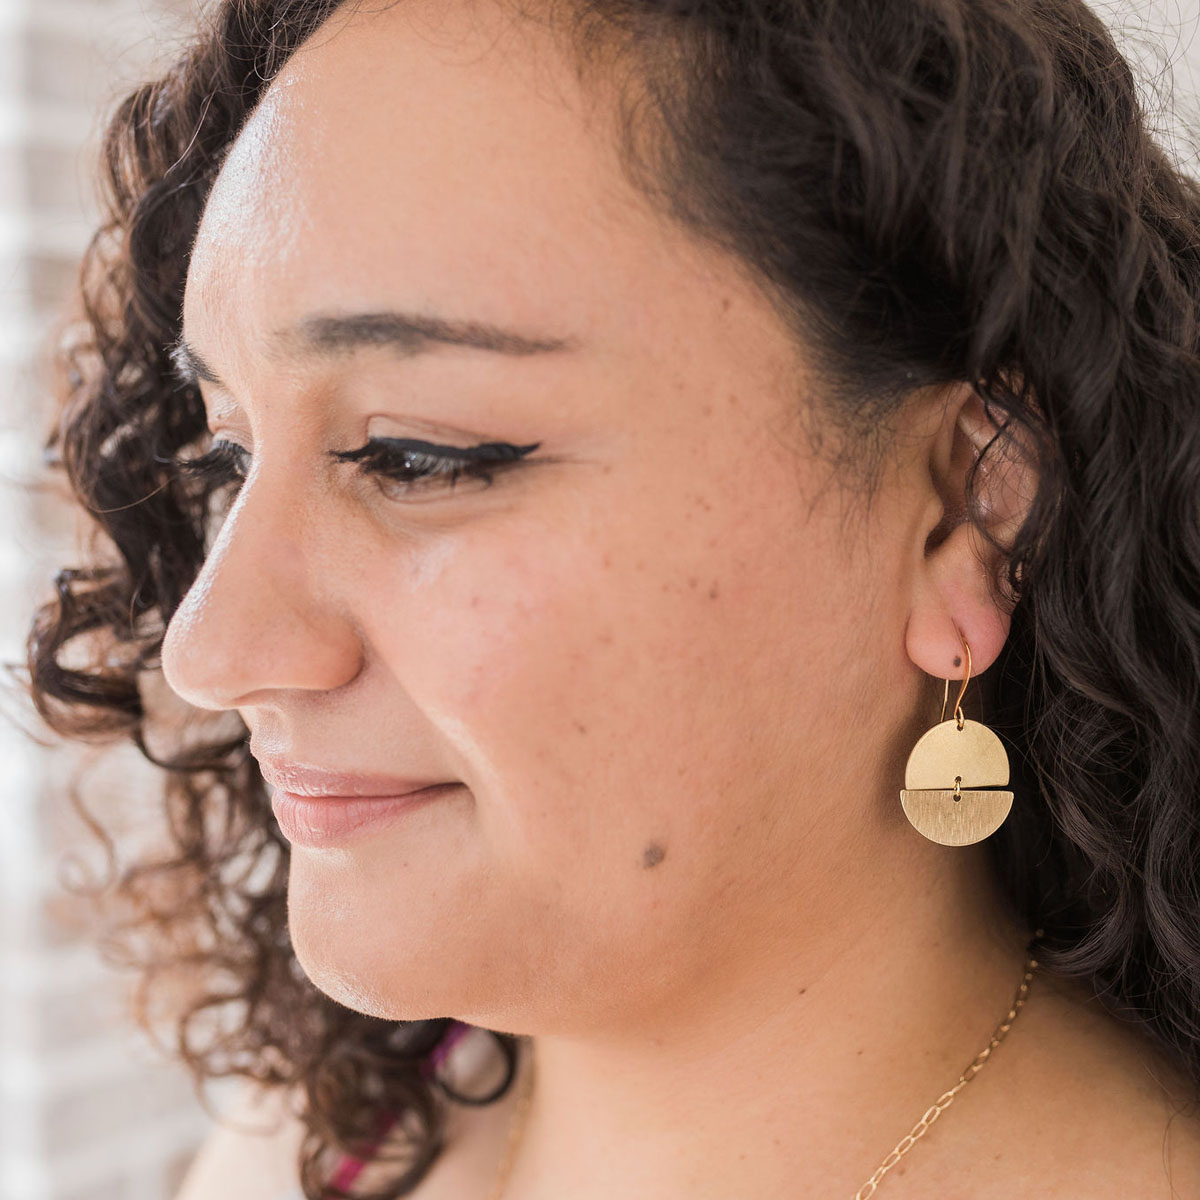 Woman modeling the Moon and Earth Earrings.